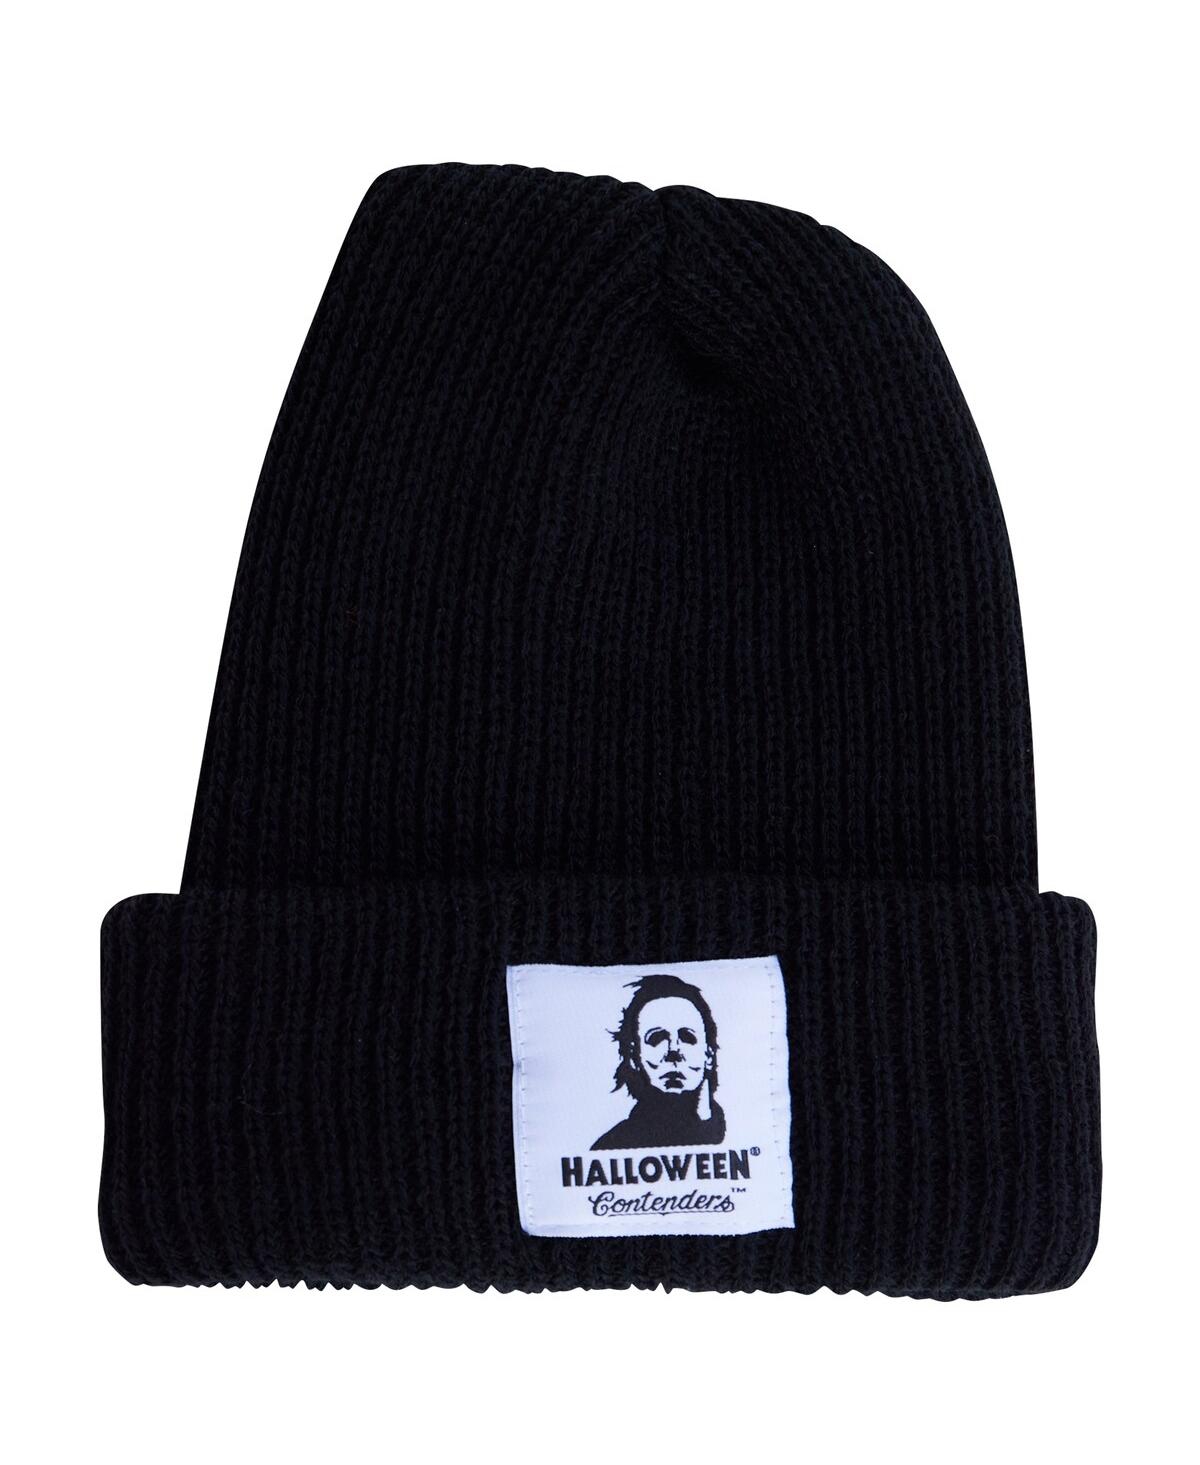 Men's and Women's Contenders Clothing Black Halloween Myers Face Cuffed Knit Hat - Black